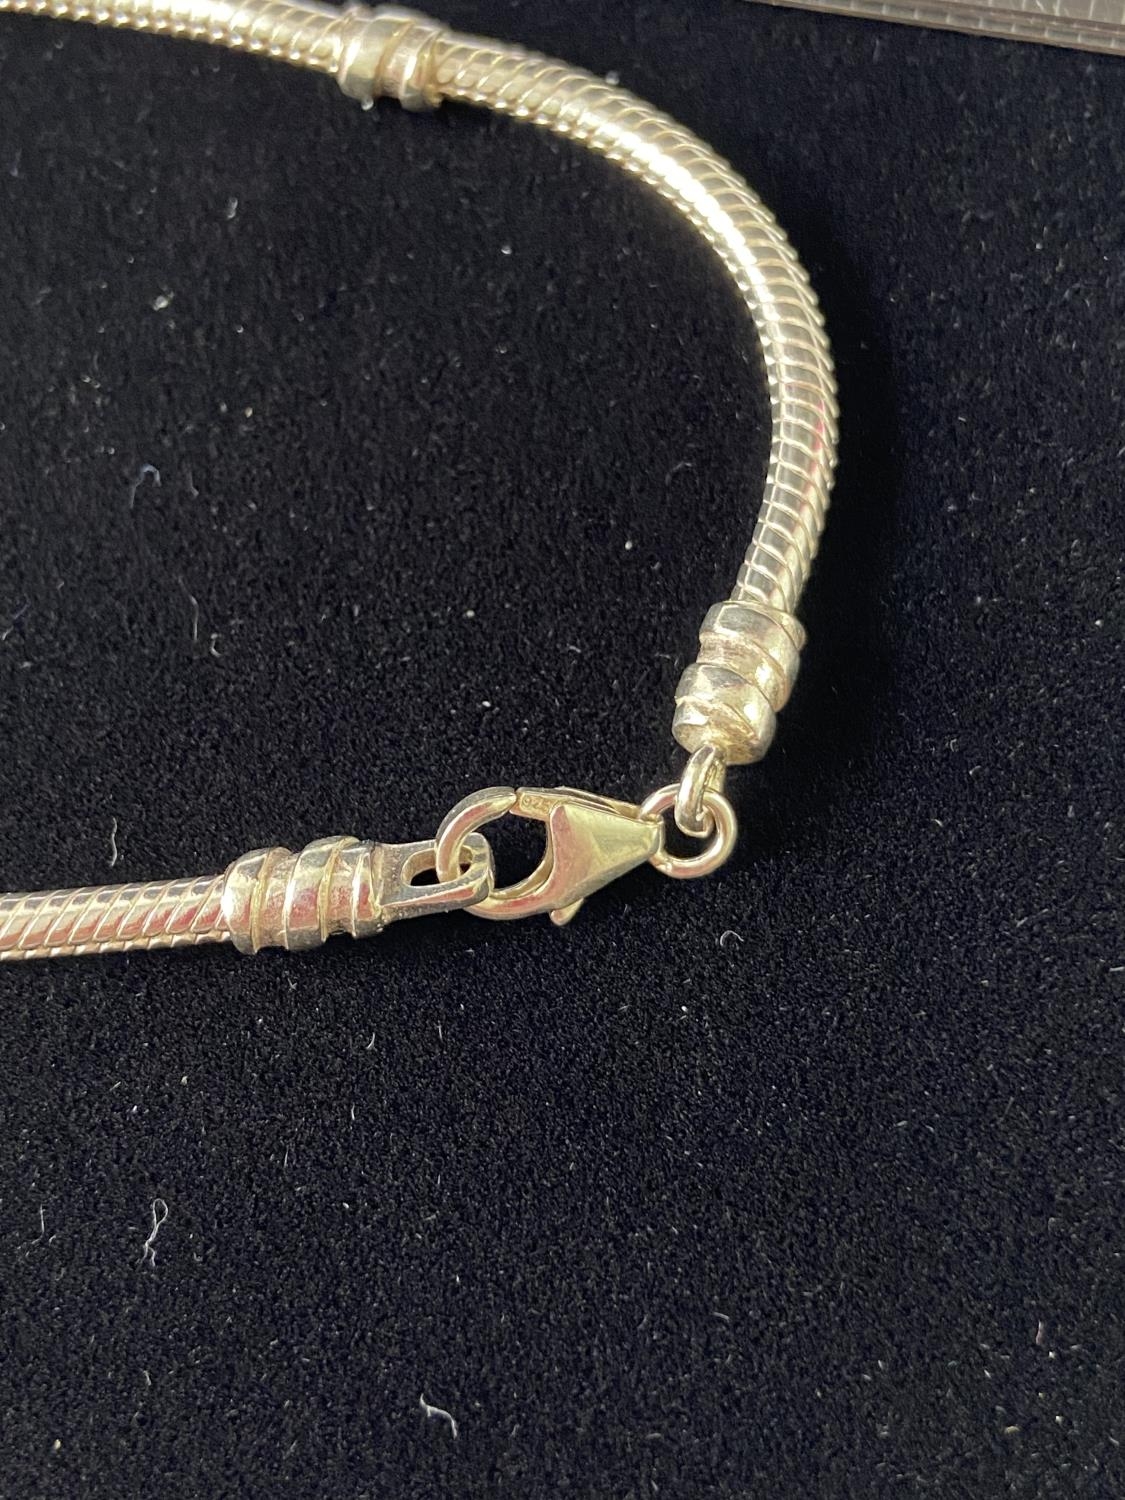 A Silver bracelet of a rope form. [20cm in length] - Image 3 of 4